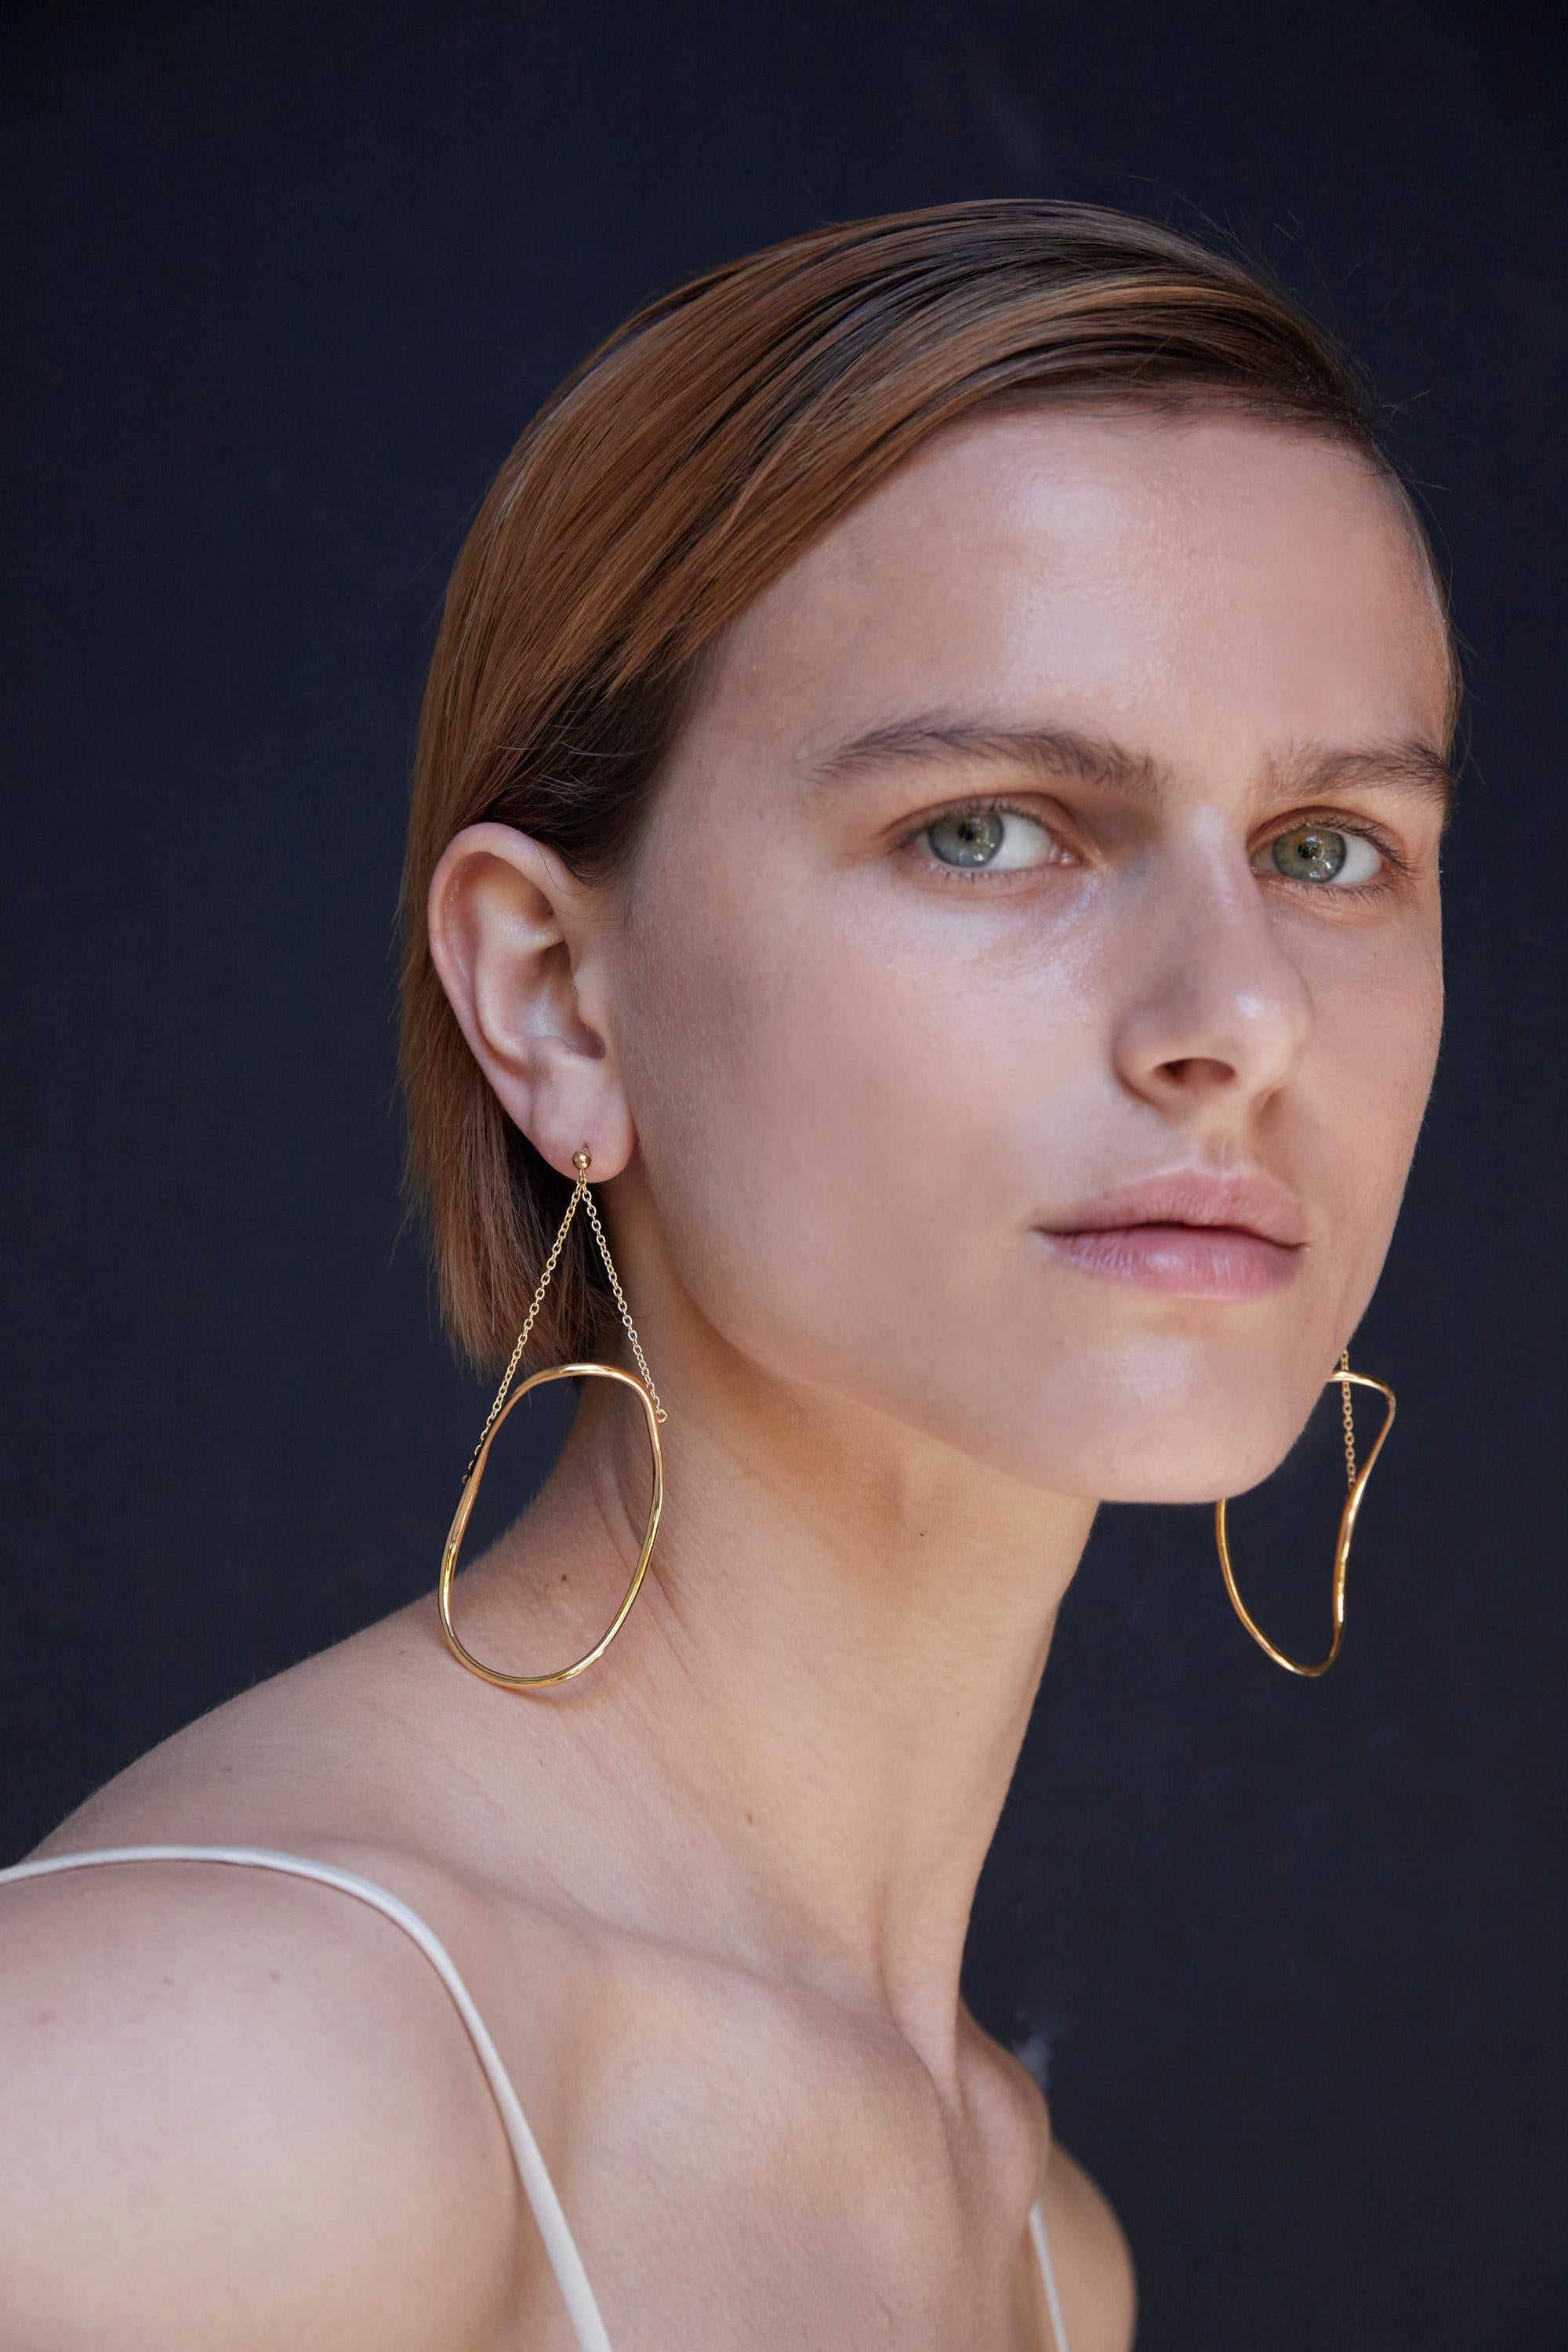 BAR Jewellery, London UK, GLIDE EARRINGS, Gold Plated 

The Glide Earrings are abstract hoops that dance beneath the ear. Inspired by the work of Constantin Brancusi and Barbara Hepworth, whose considered, curved sculptures mimic forms in